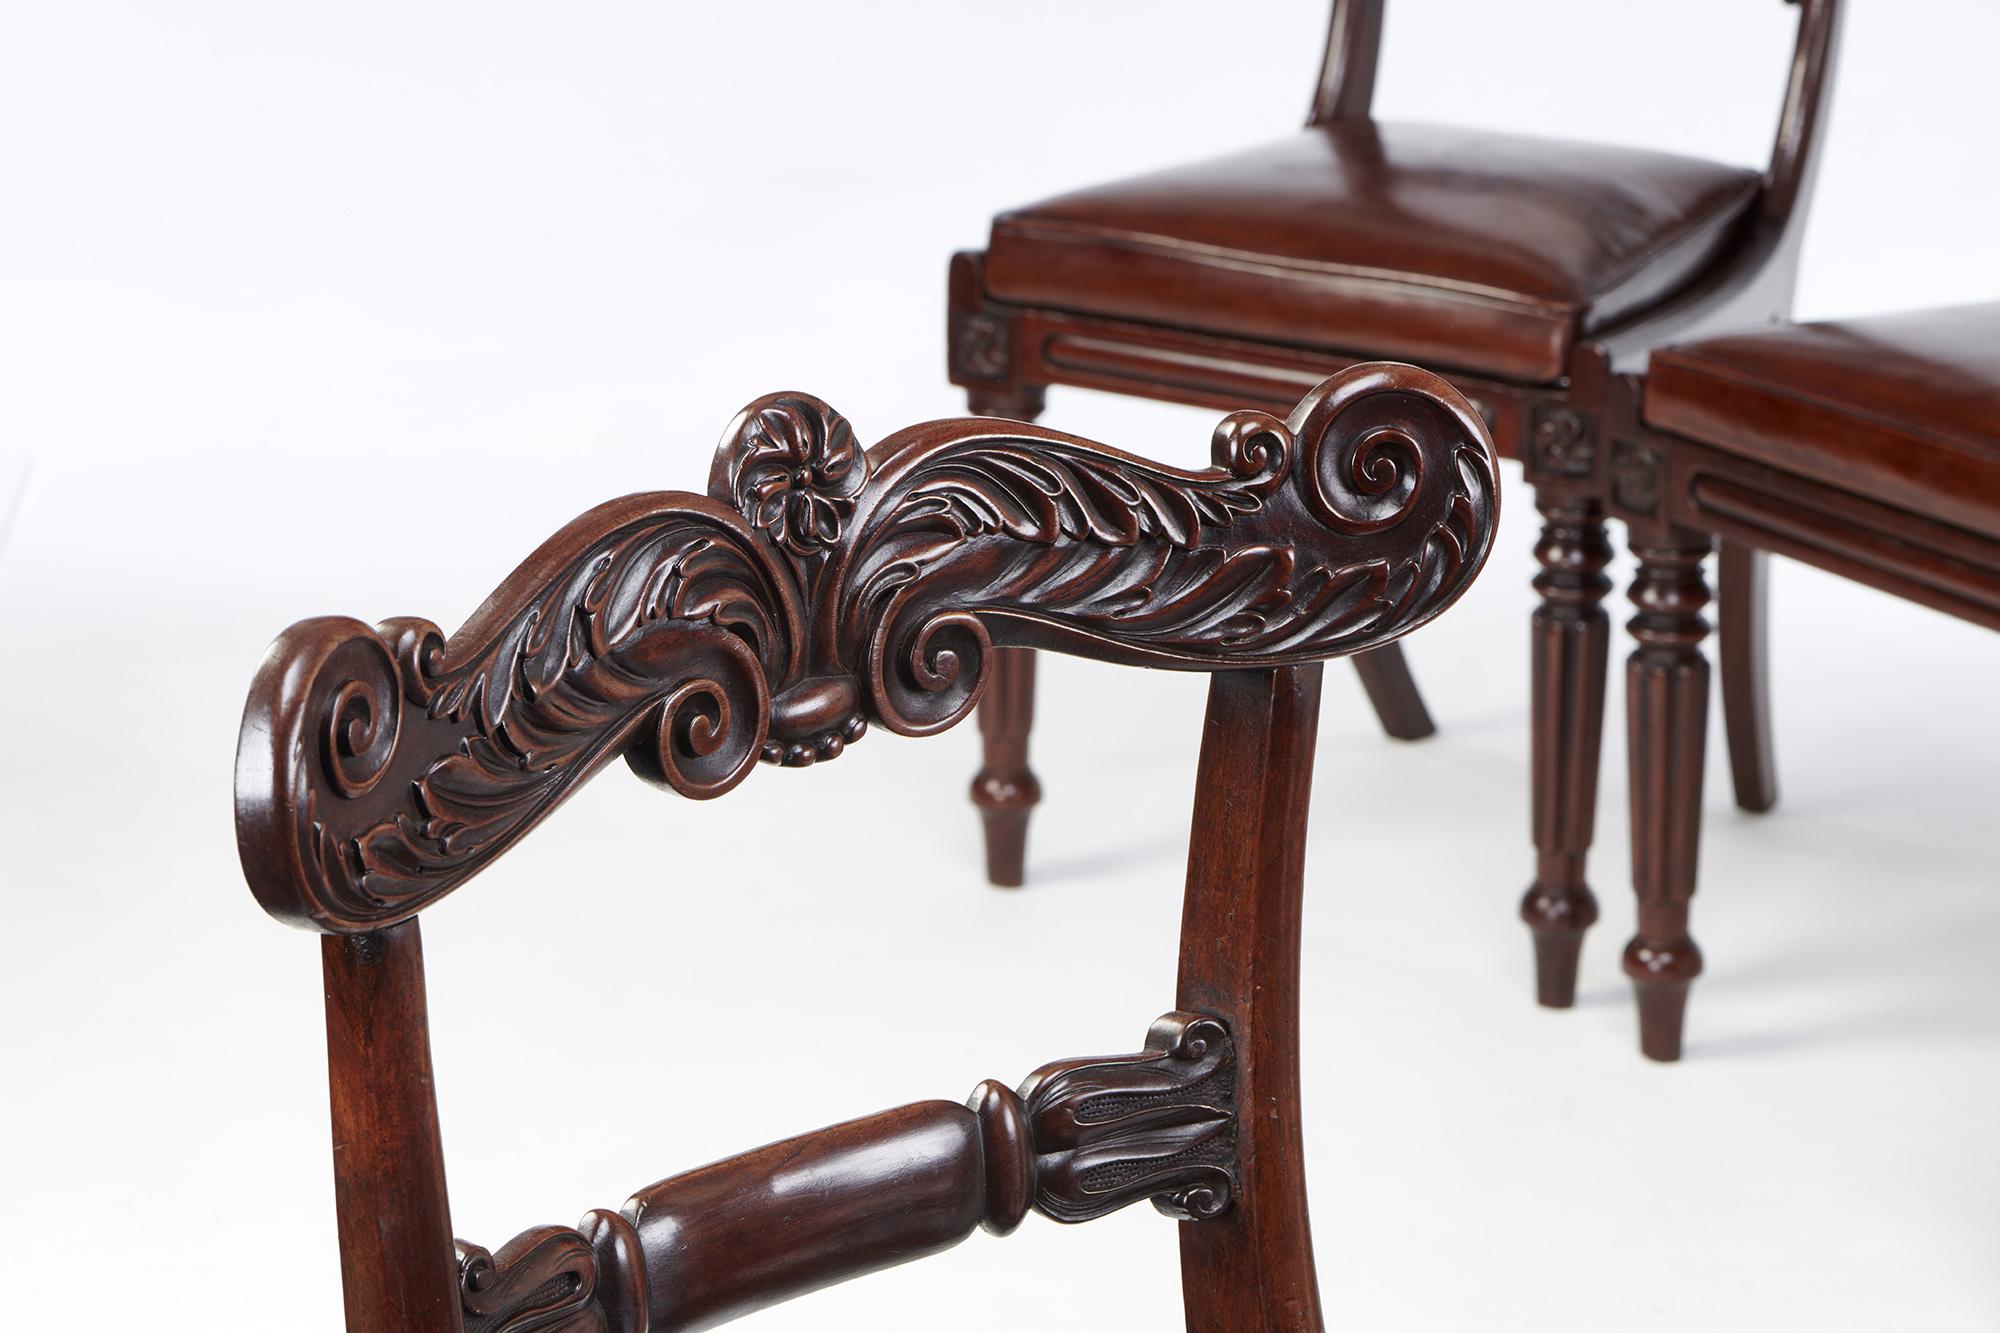 Set of Six William IV Mahogany and Leather Dining Chairs (Leder)